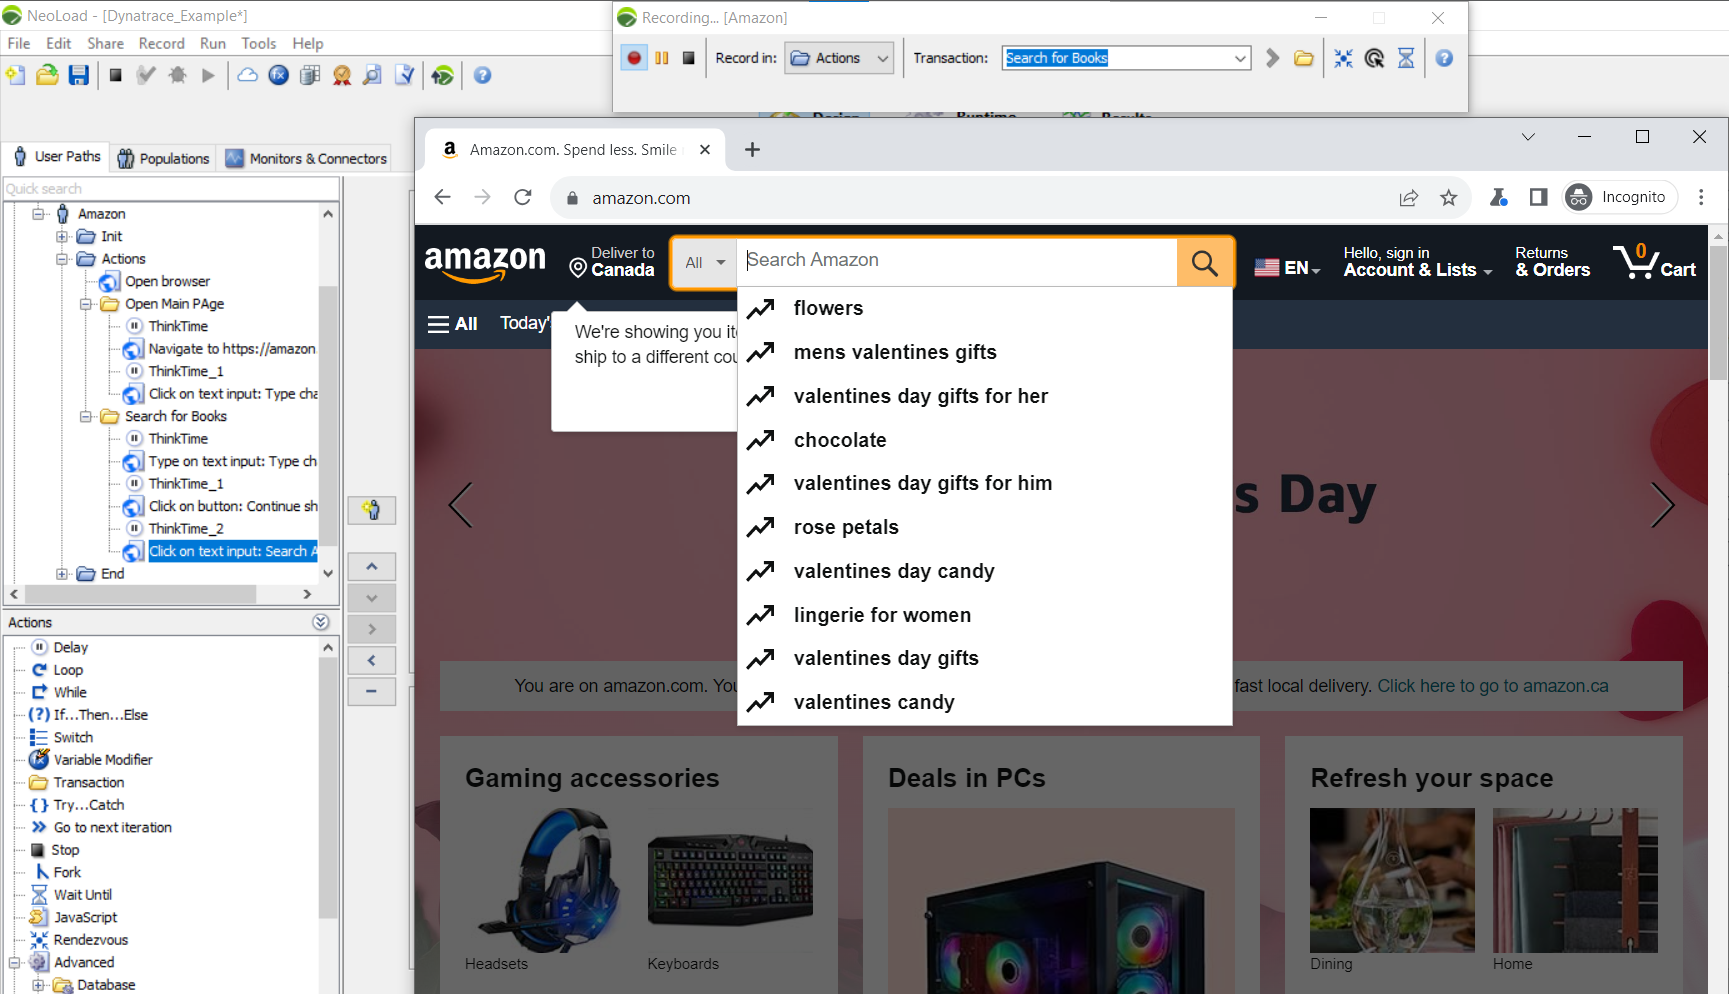 NeoLoad RealBrowser example from Amazon.com